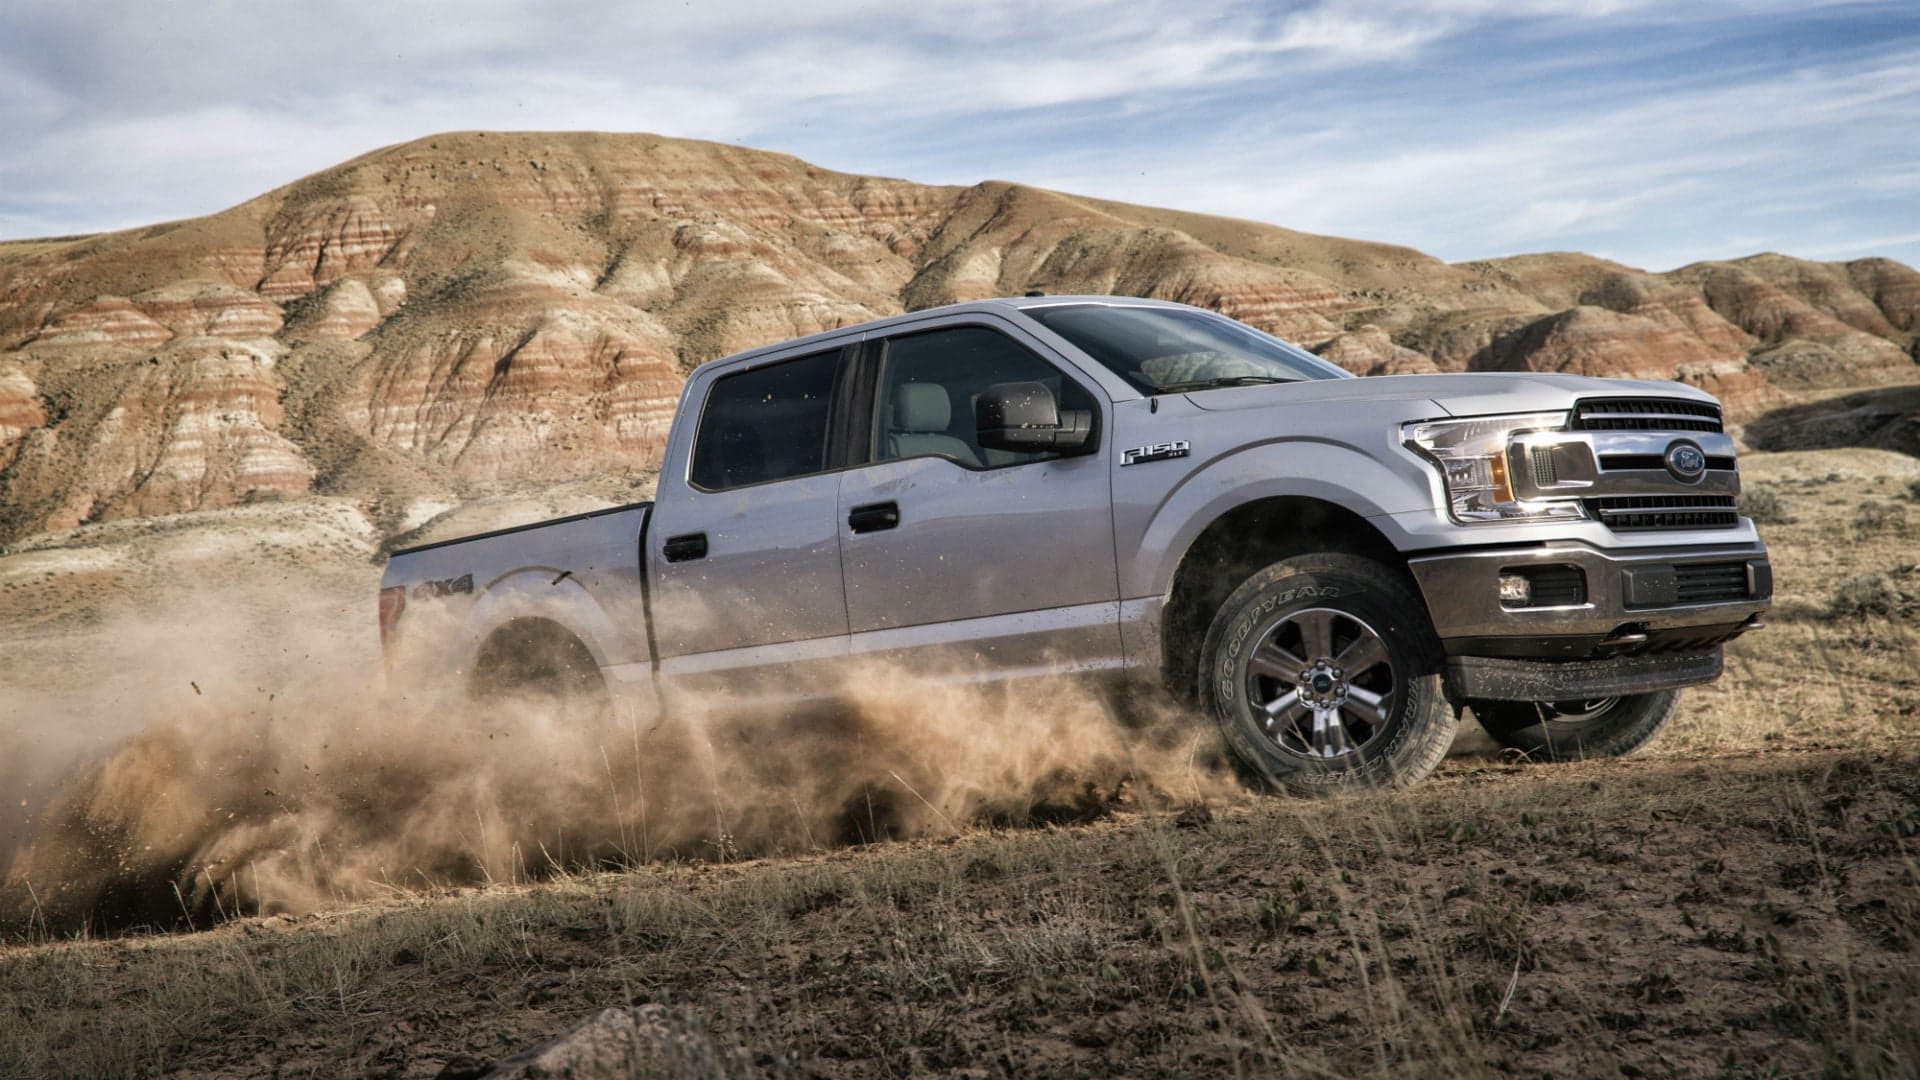 This Dealership is Selling 725-HP Ford F-150s for $38,000